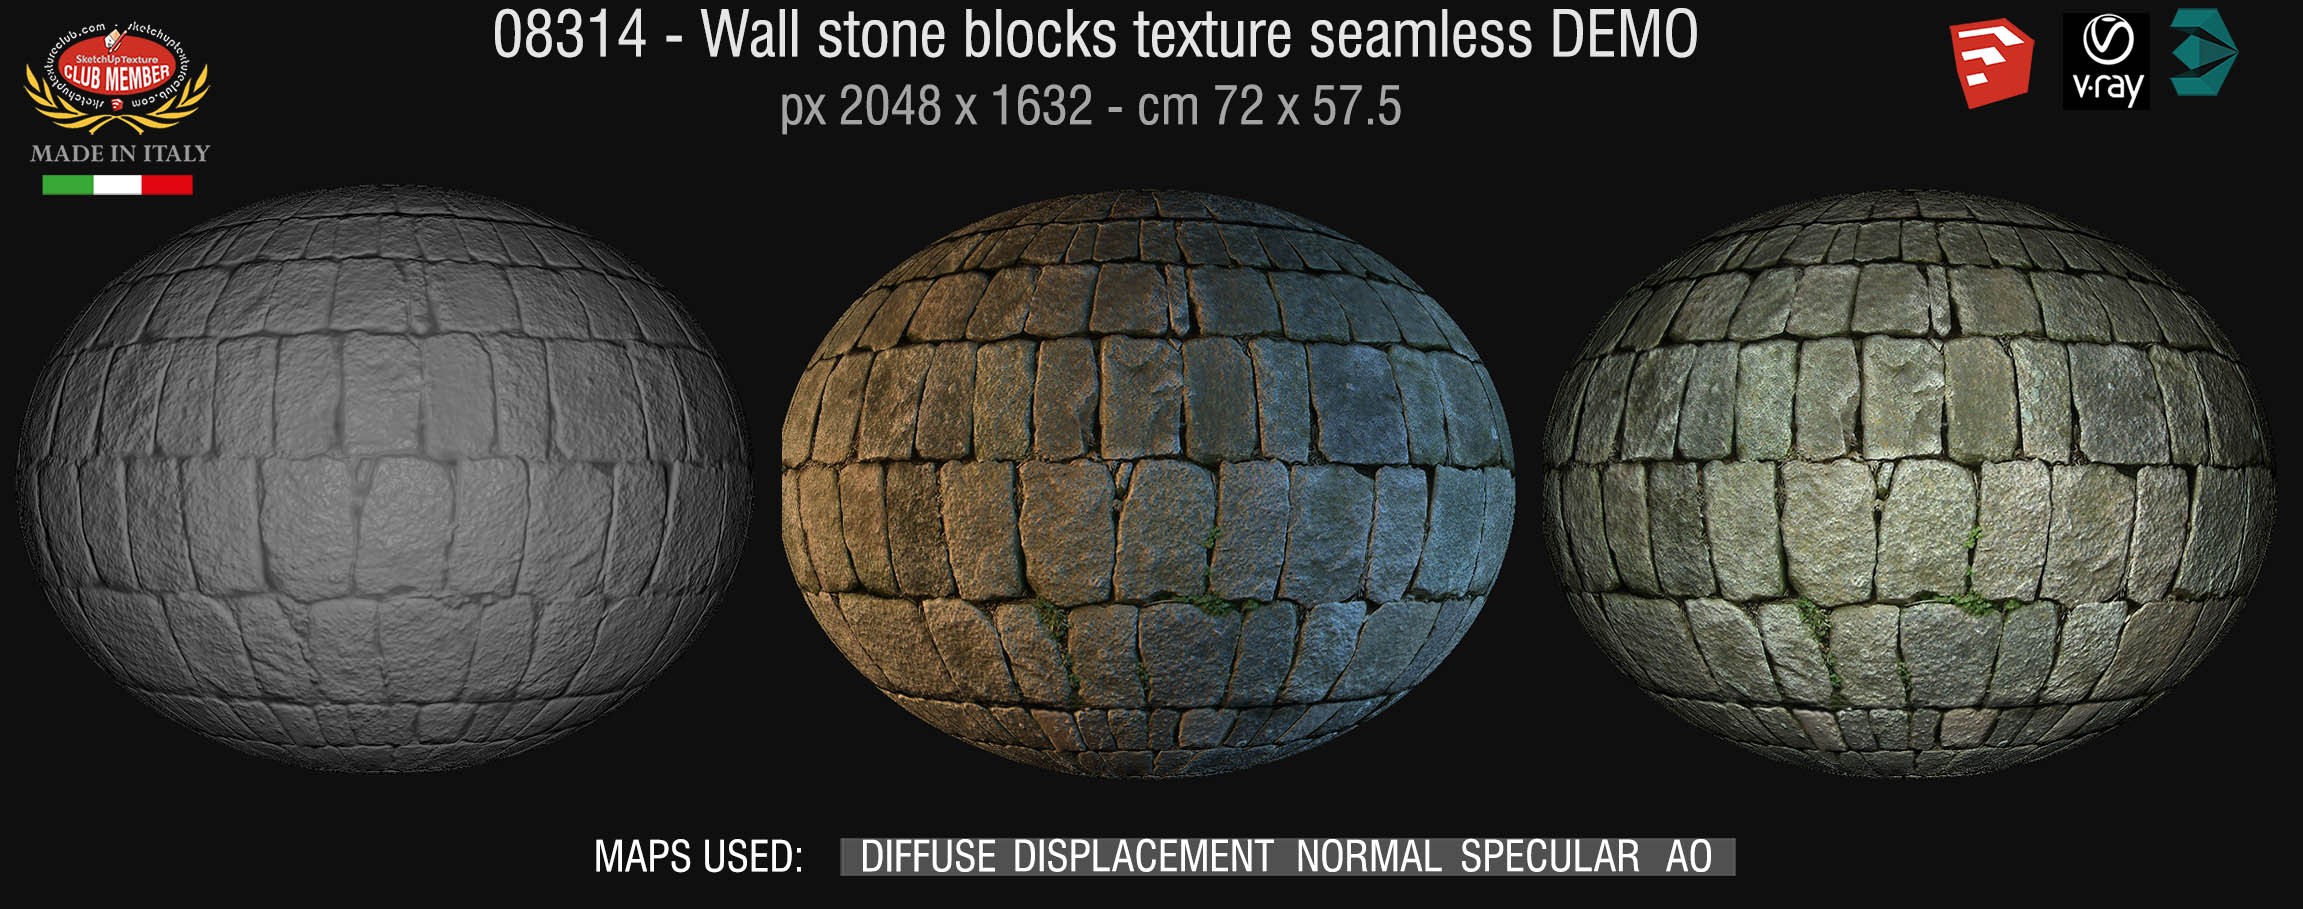 08314 HR Wall stone with regular blocks texture + maps DEMO